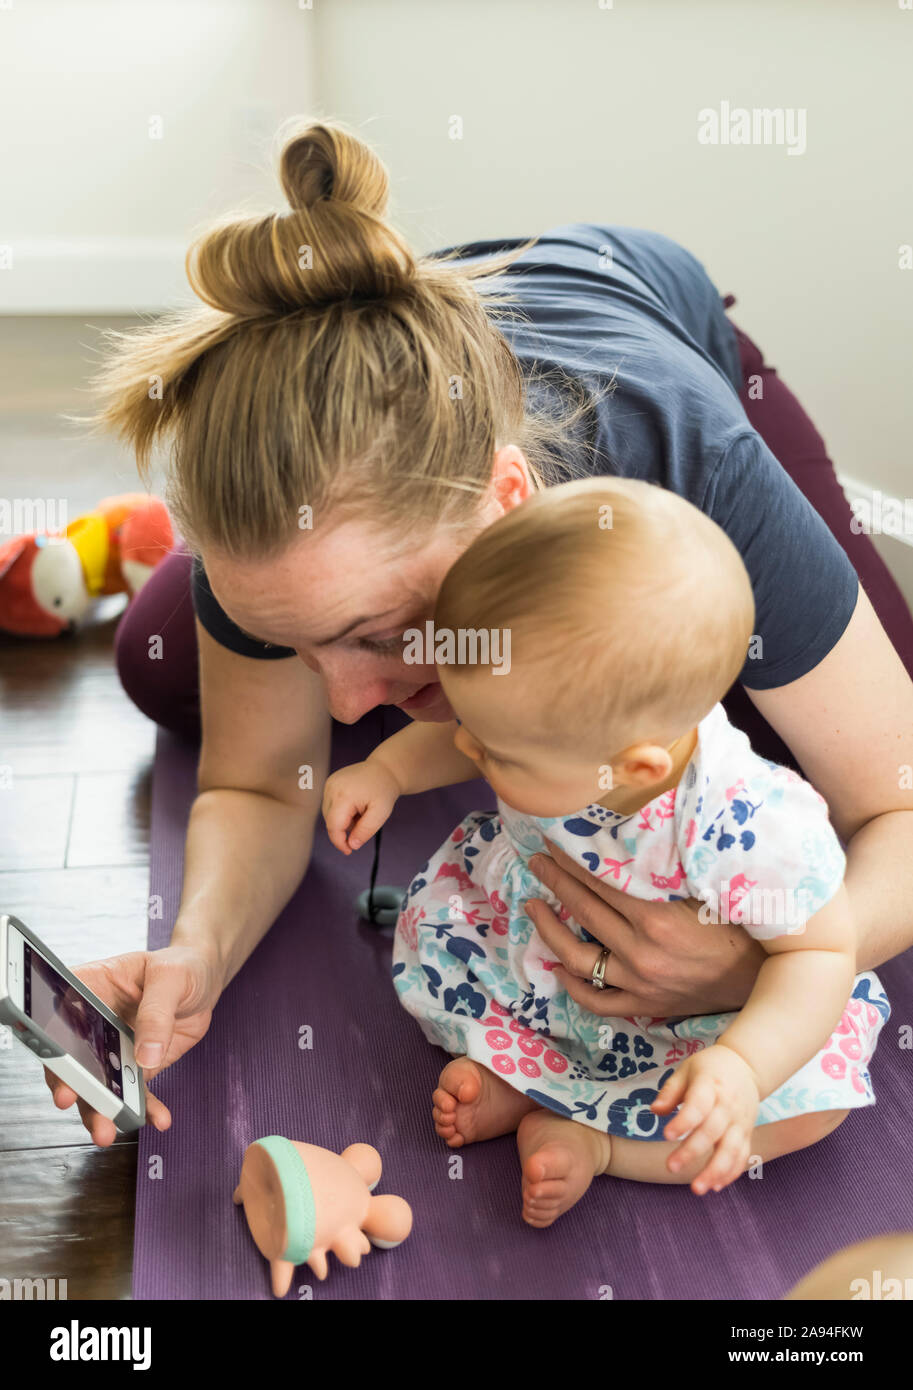 Mother showing image on smart phone to baby daughter; Vancouver, British Columbia, Canada Stock Photo